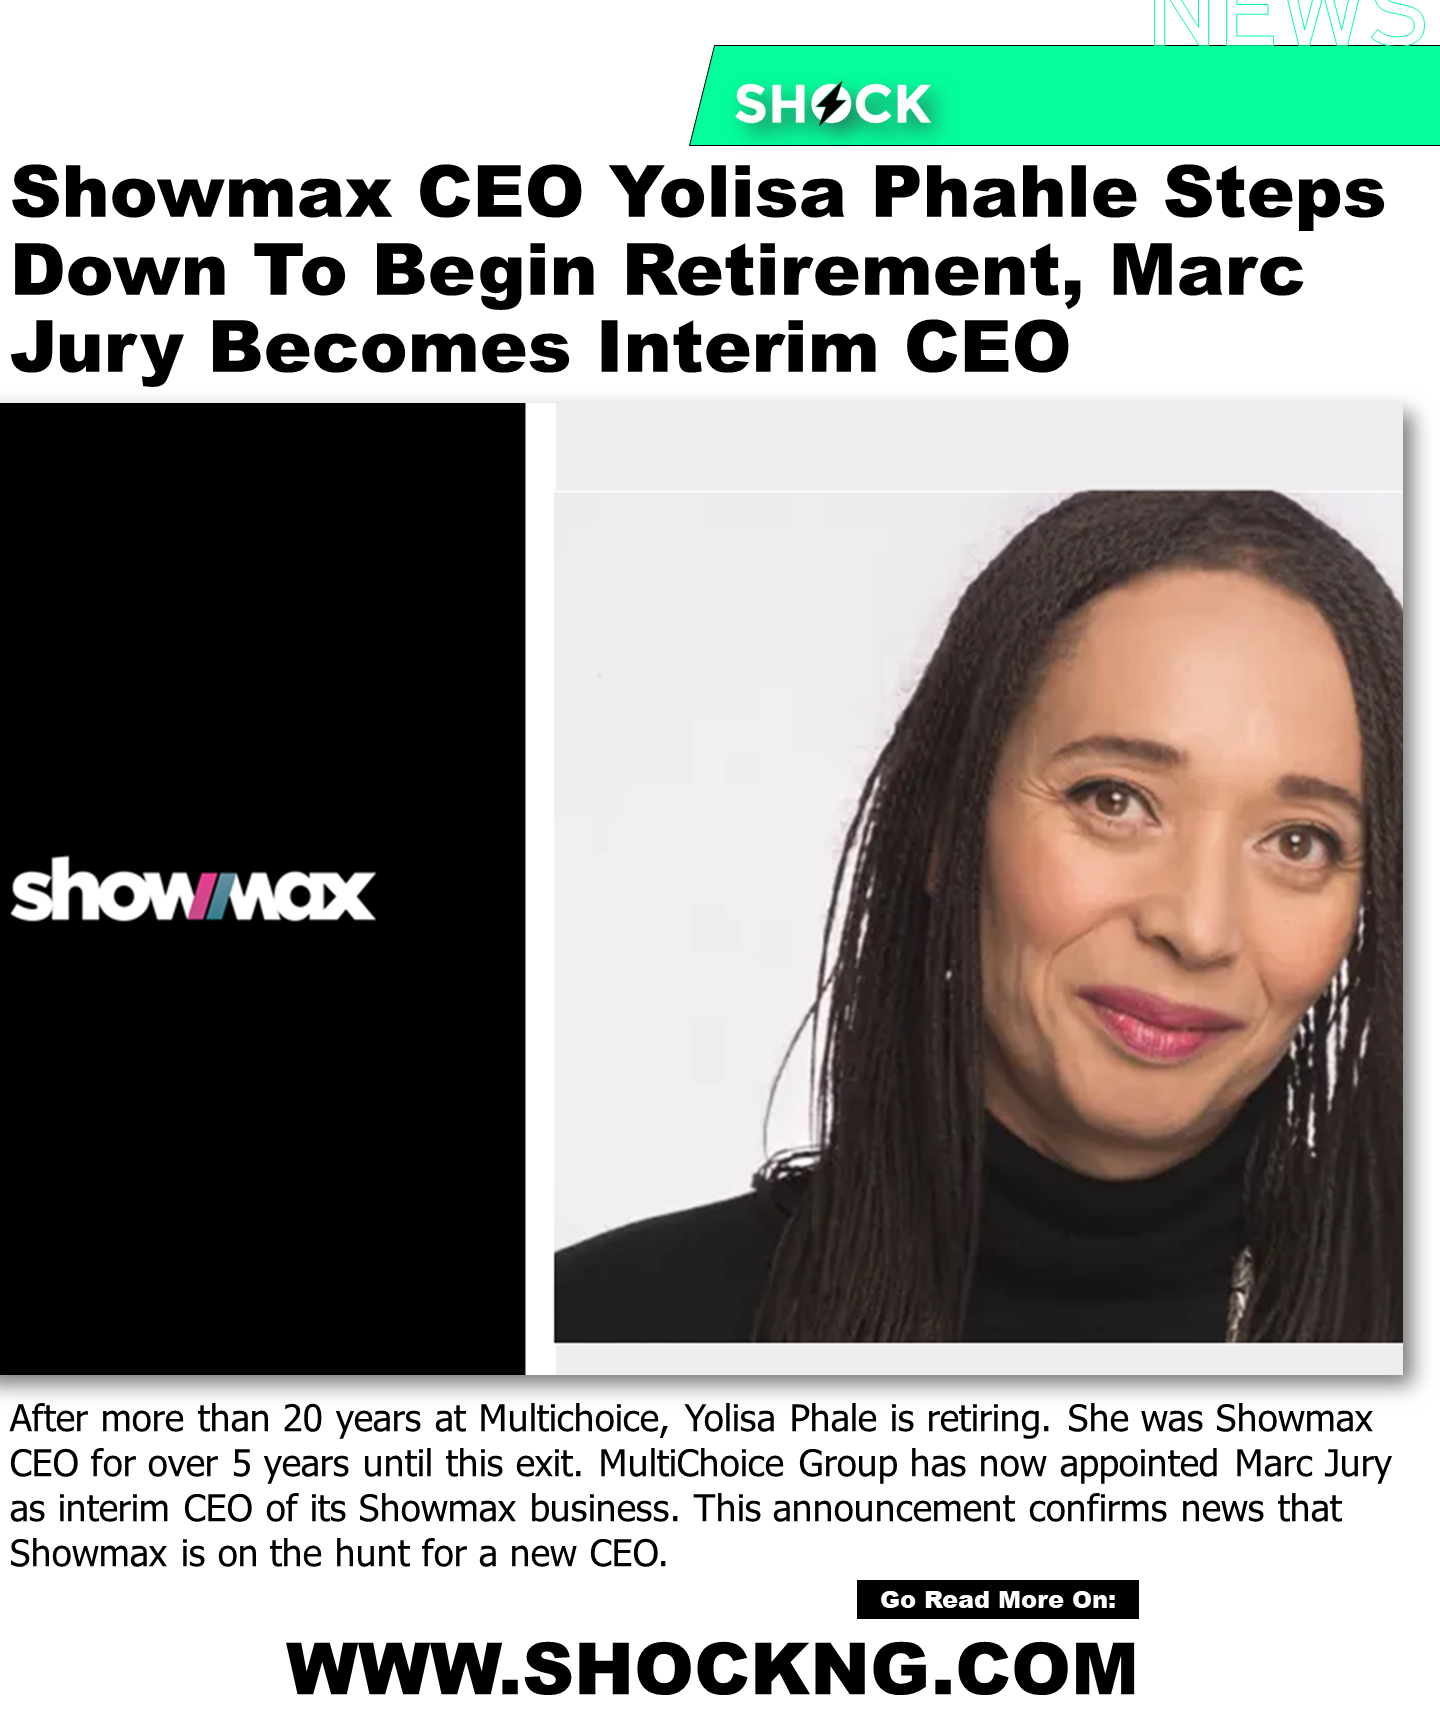 showmax ceo retires - Showmax CEO Yolisa Phahle Steps Down To Begin Retirement